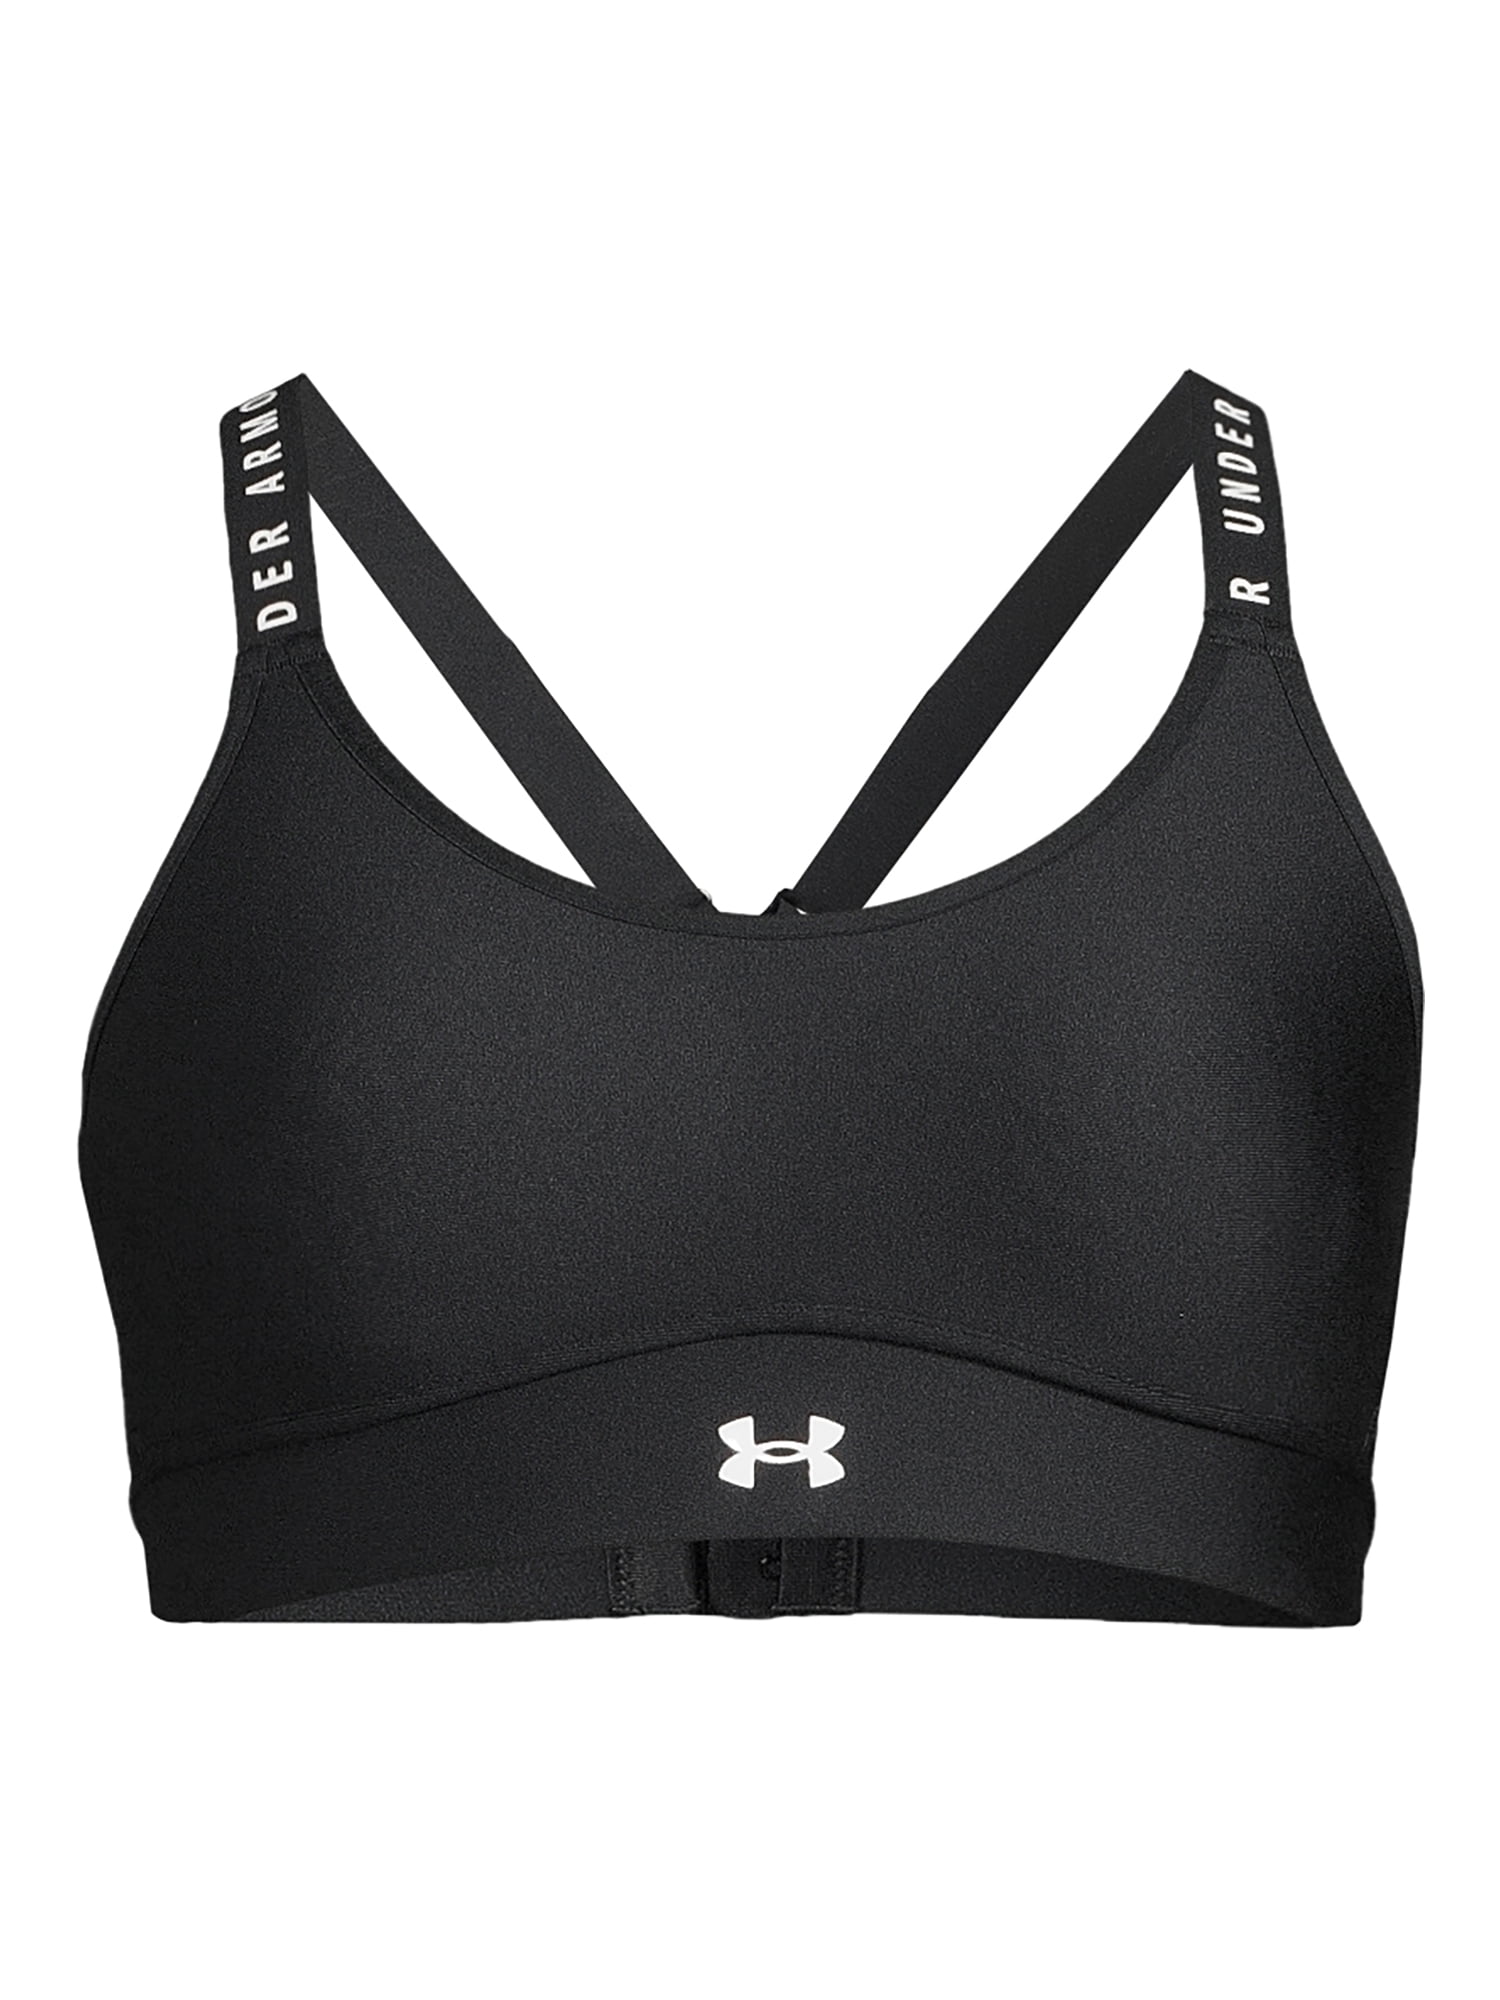 Under Armour Infinity Low Impact Sports Bra, in Red